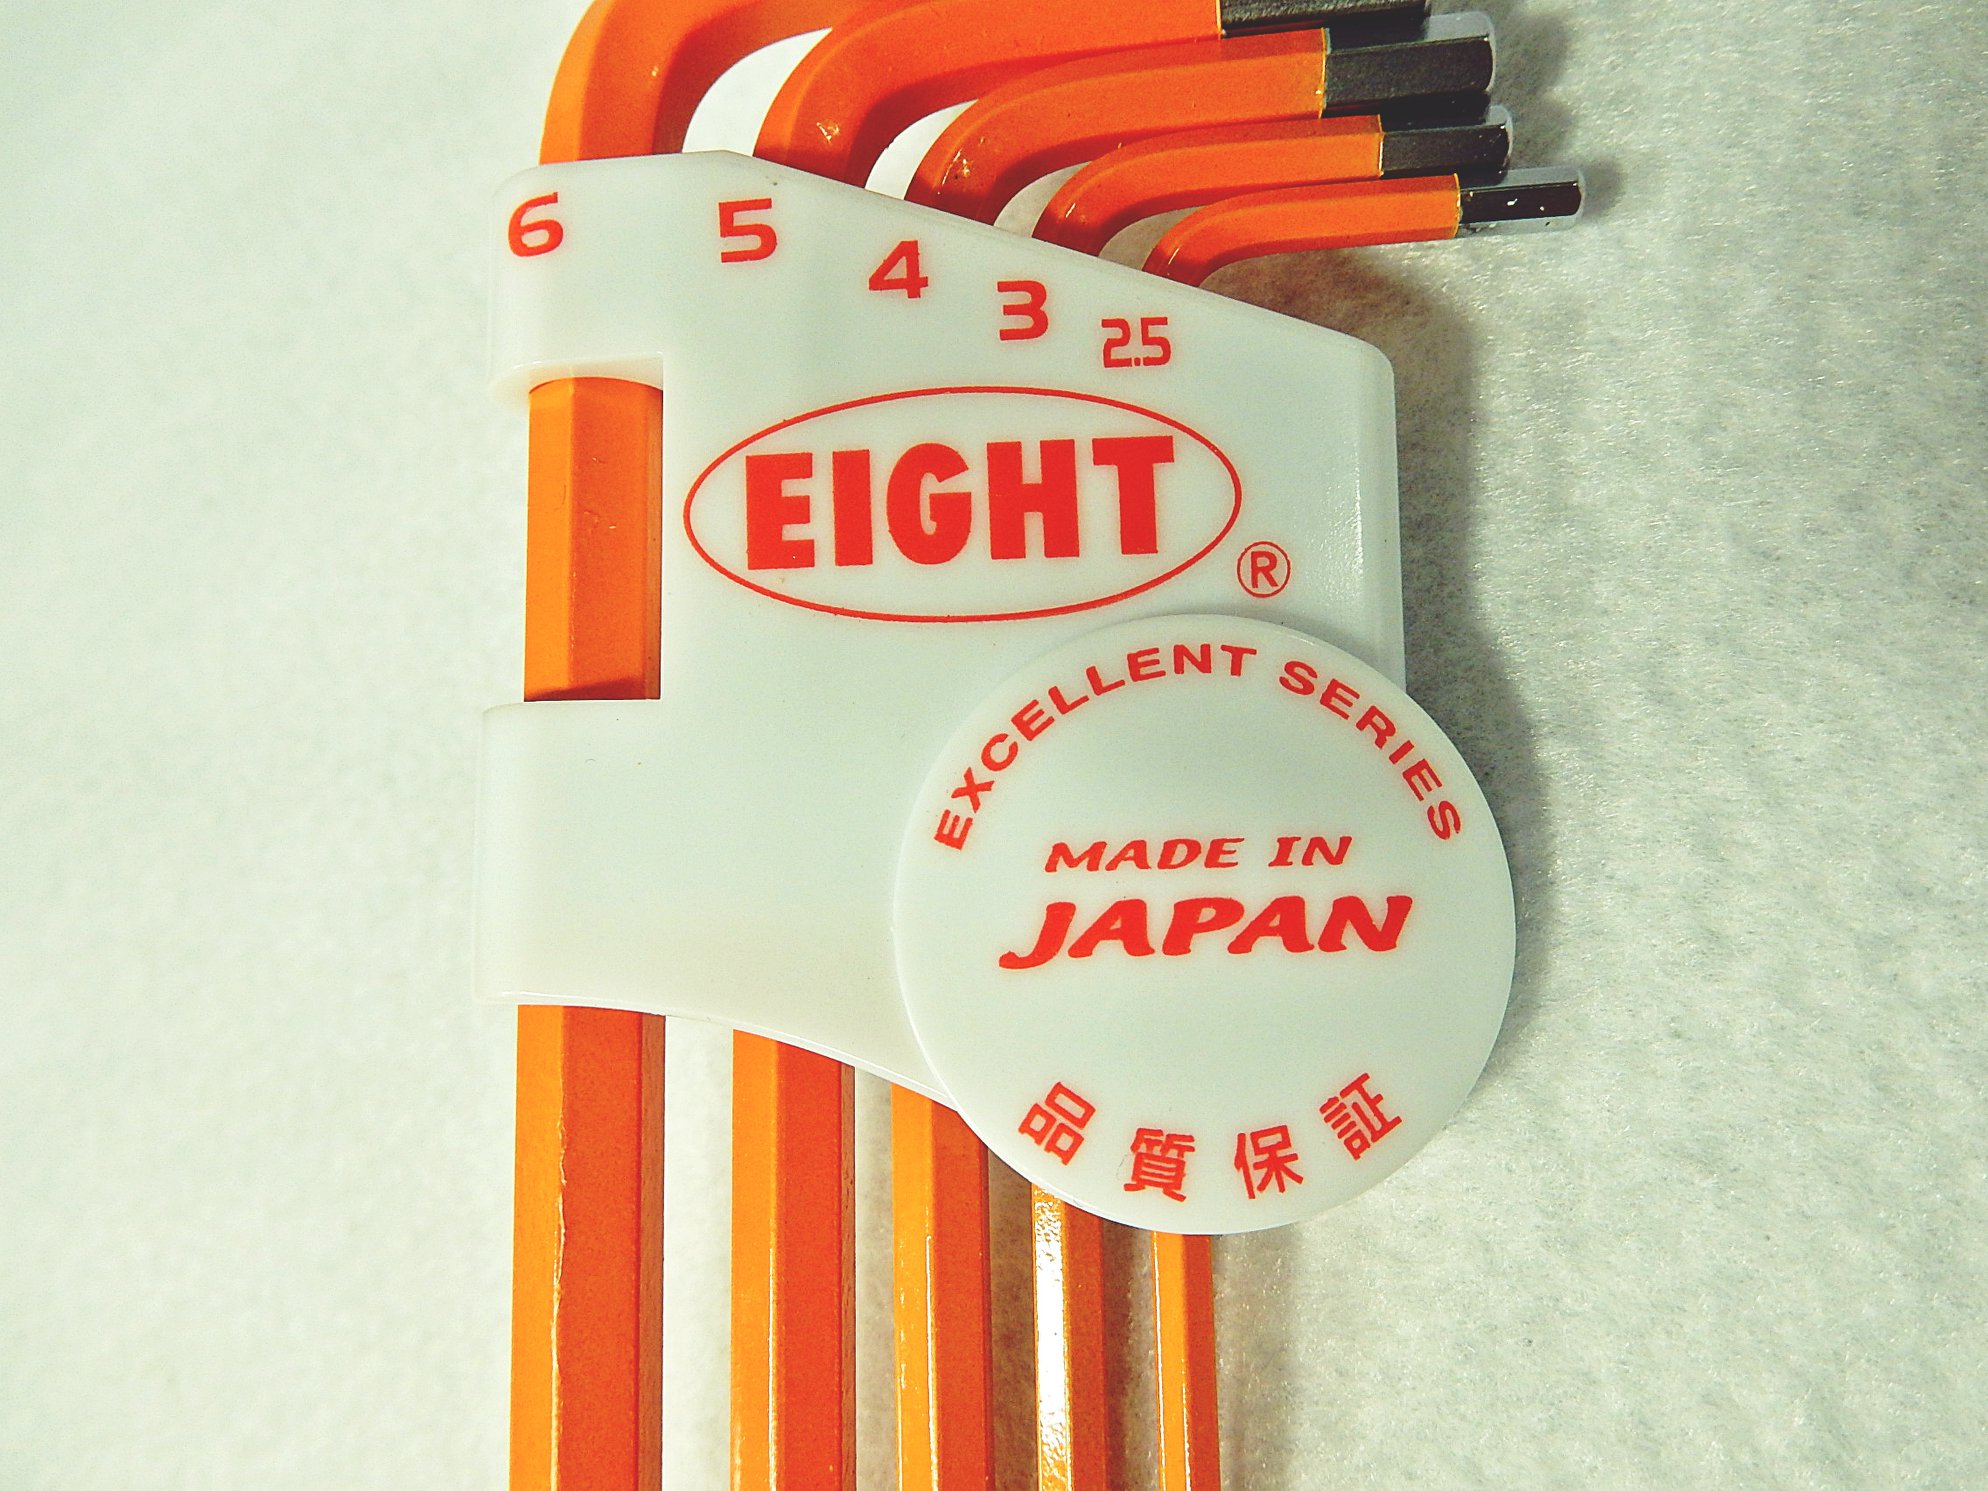 EIGHT eight エイト　ヘキサレンチ　六角レンチ　MADE IN JAPAN made in japan 日本製　工具　広島県福山市　FINE fine ファイン